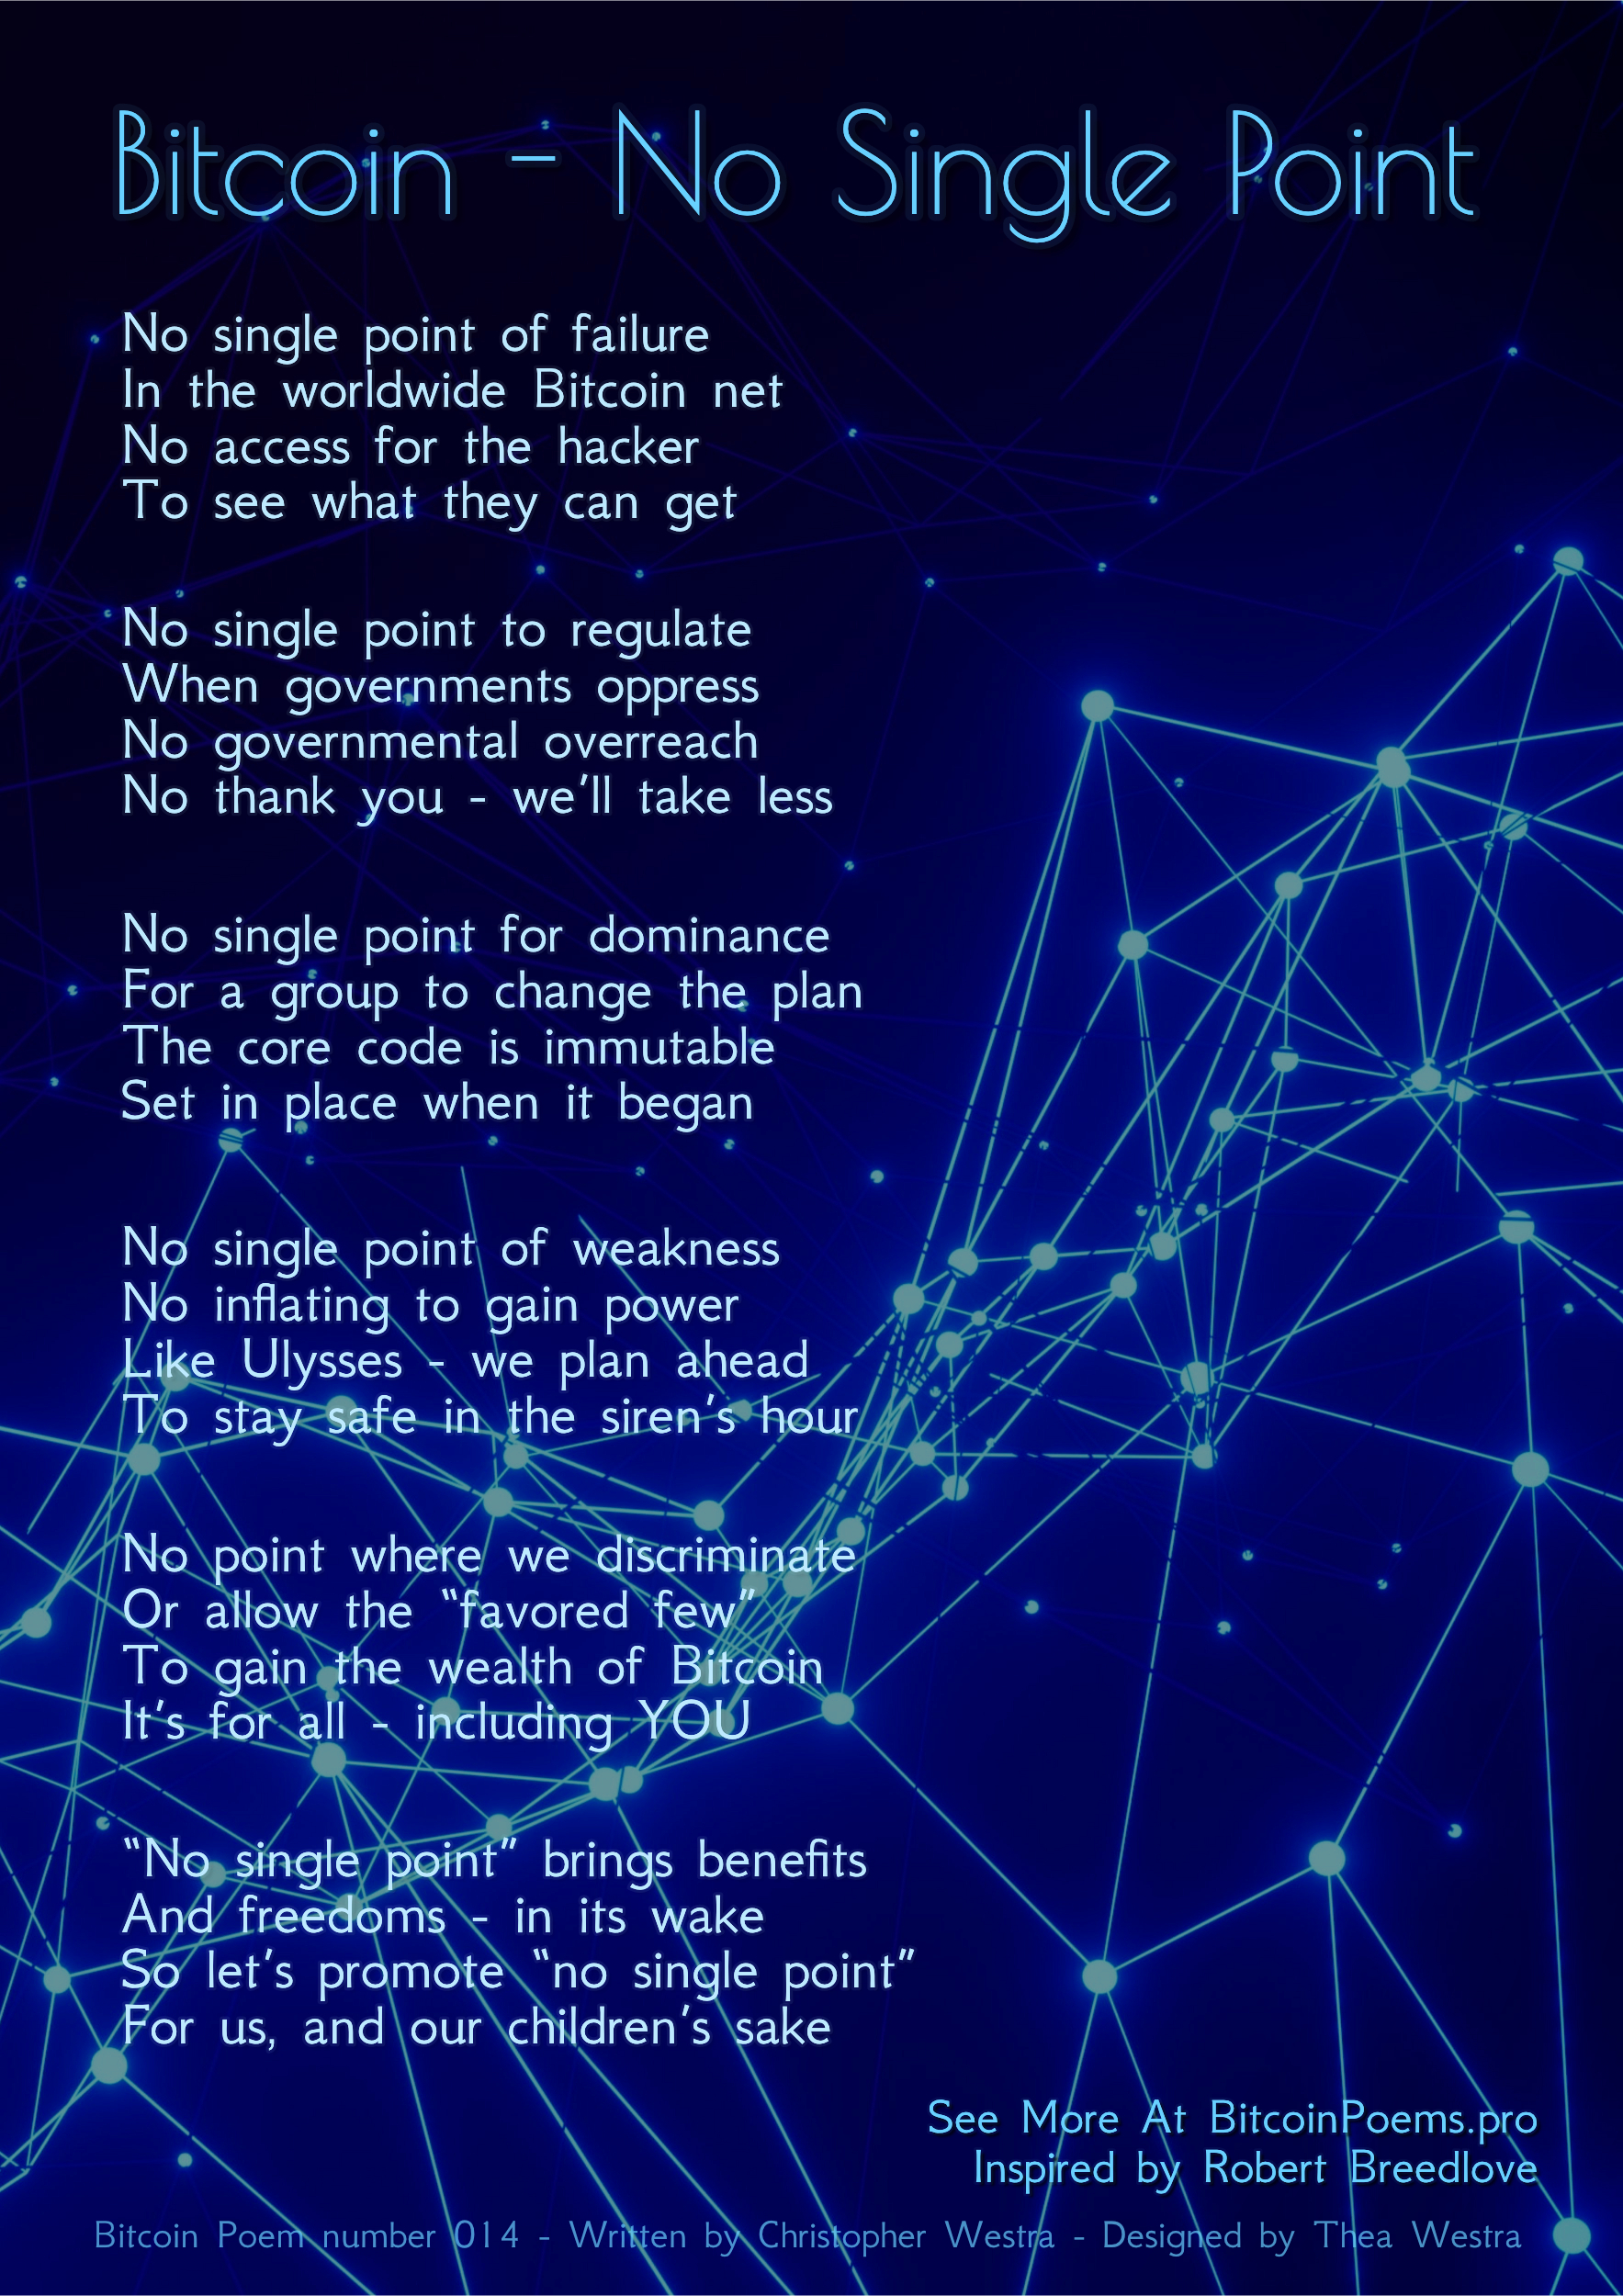 Bitcoin - No Single Point - Bitcoin Poem 014 by Christopher Westra 